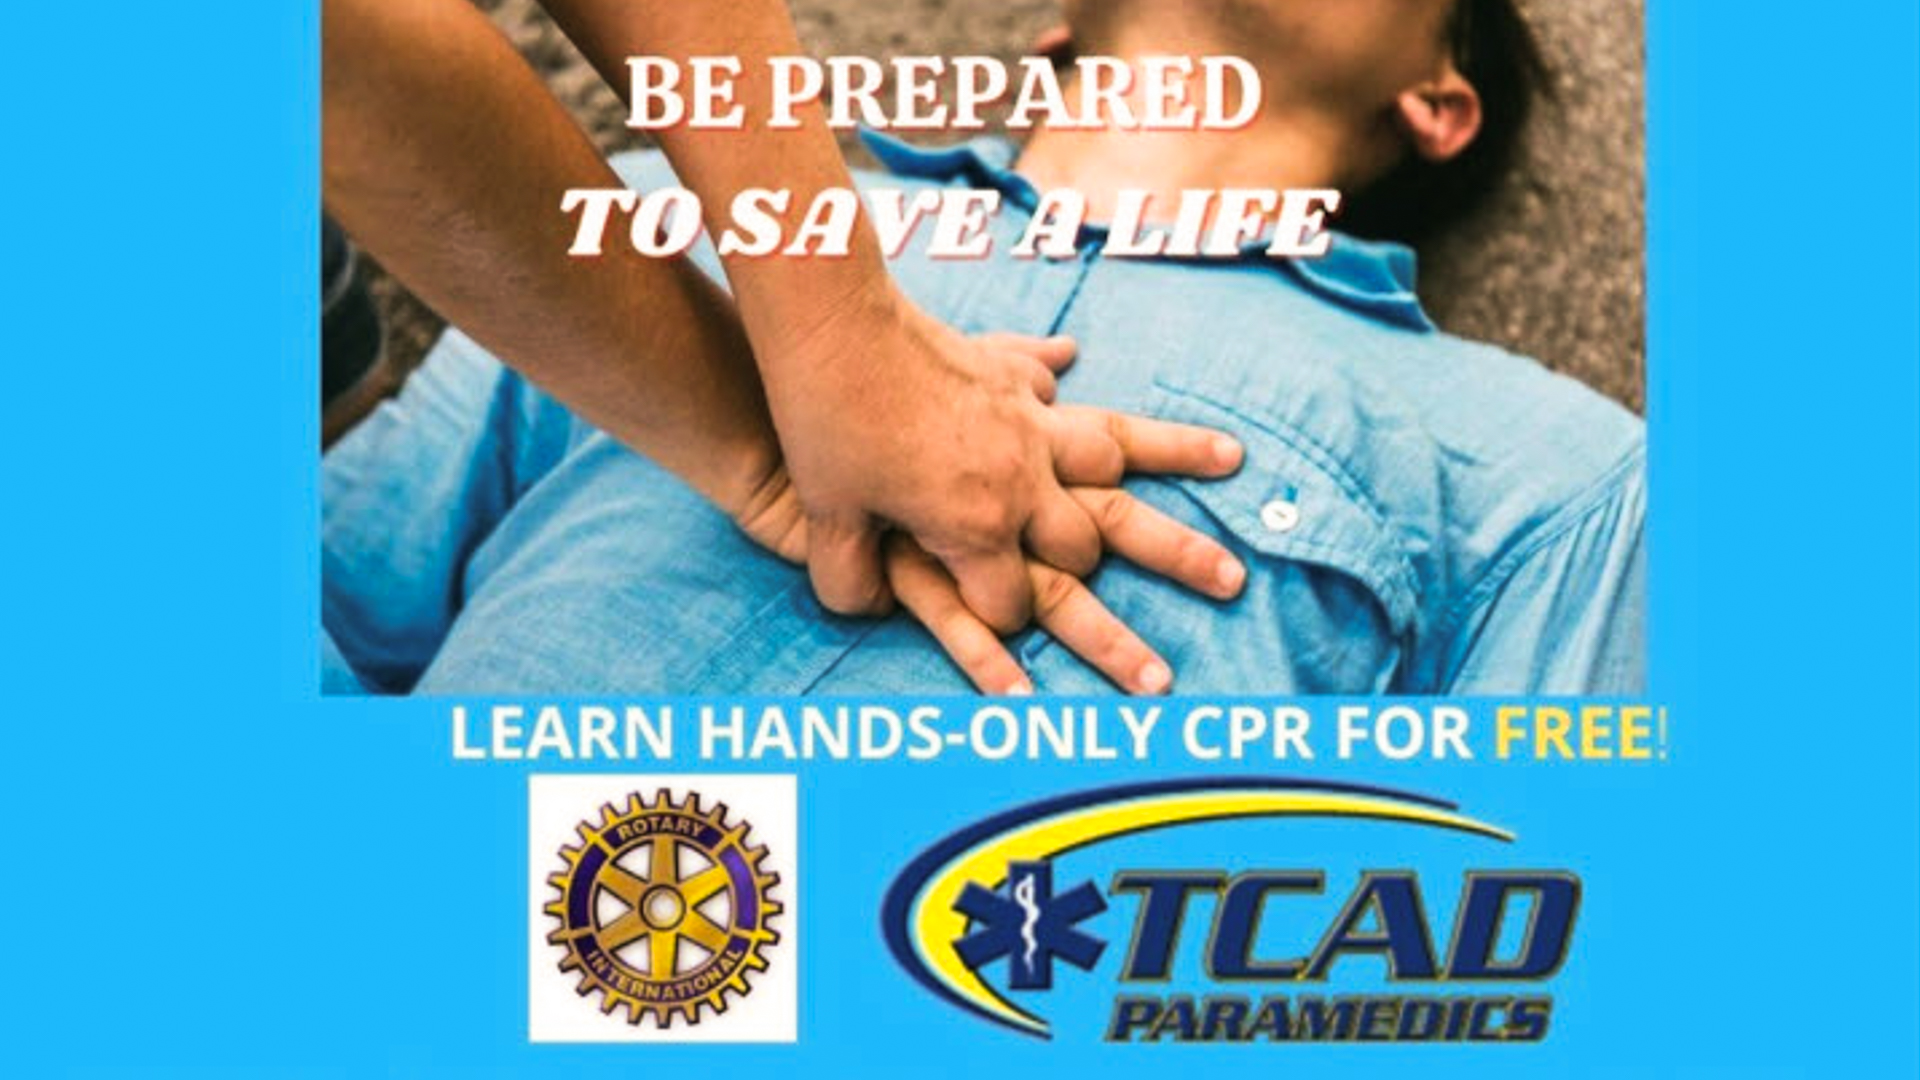 220203 TCAD HNDS cpr - Free Hands-Only CPR classes can save the life of someone you love!